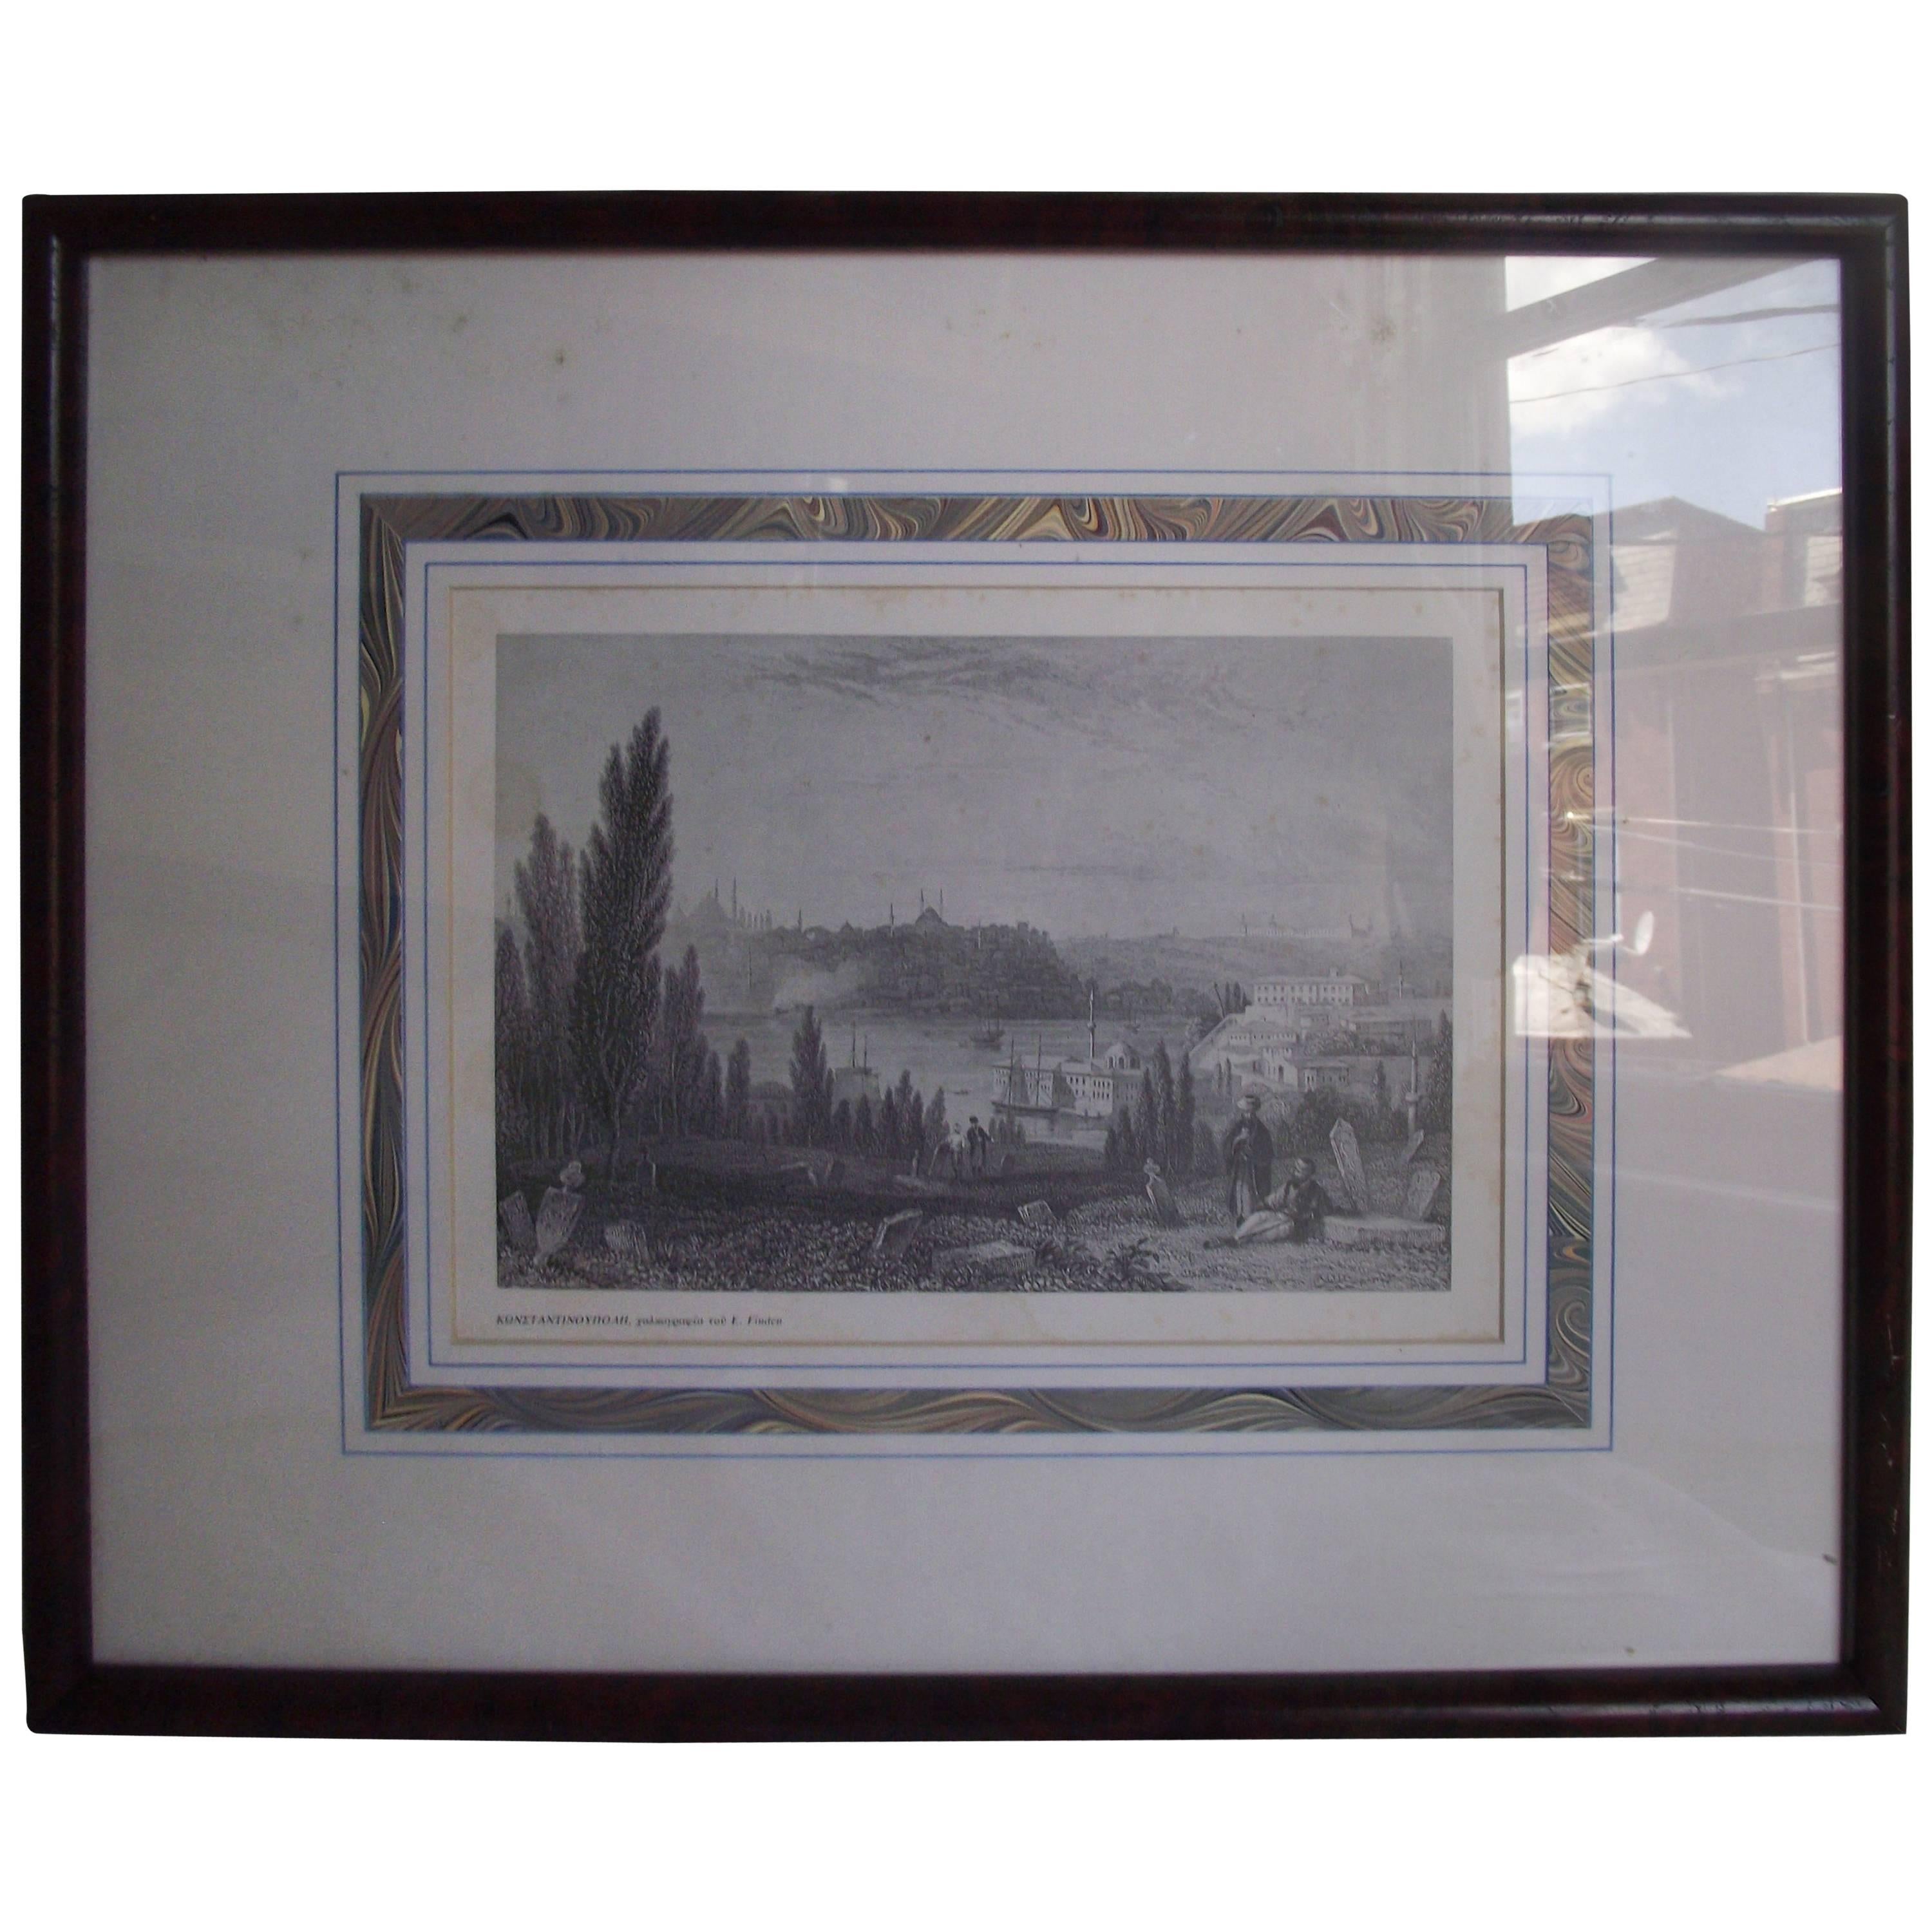 One of five prints in beautiful original mats and frame. Frame as a burl wood finish.

An engraver, Edward Francis Finden (1791-1857) His engravings were very popular in the mid-19th century.